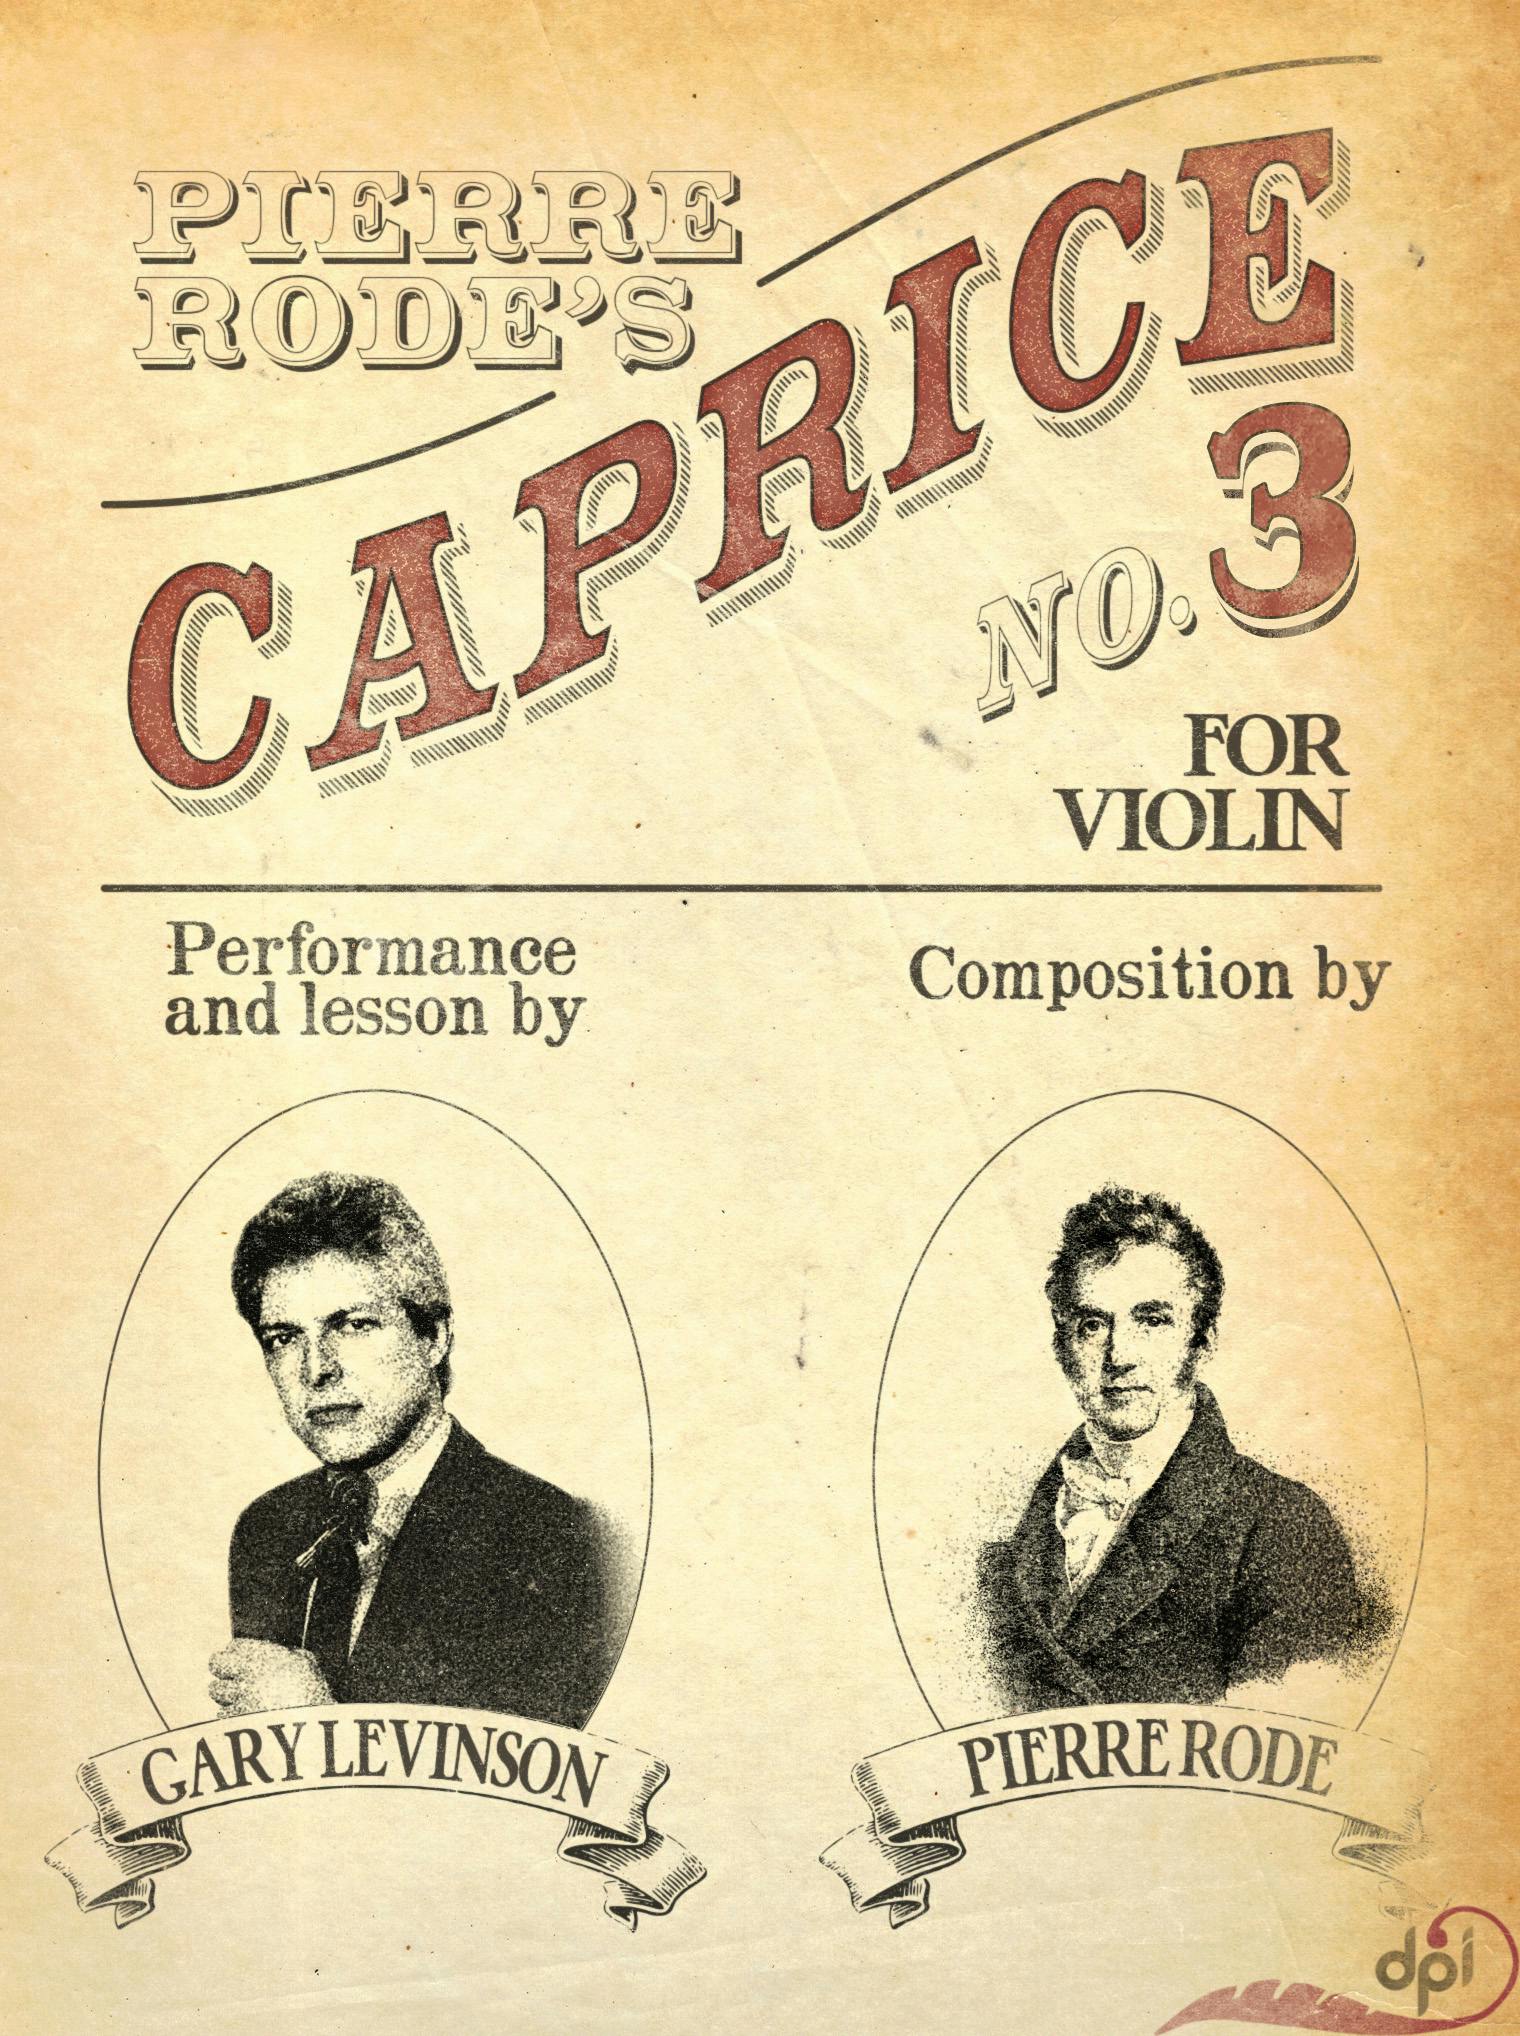 Pierre Rode's Caprice No. 3 cover